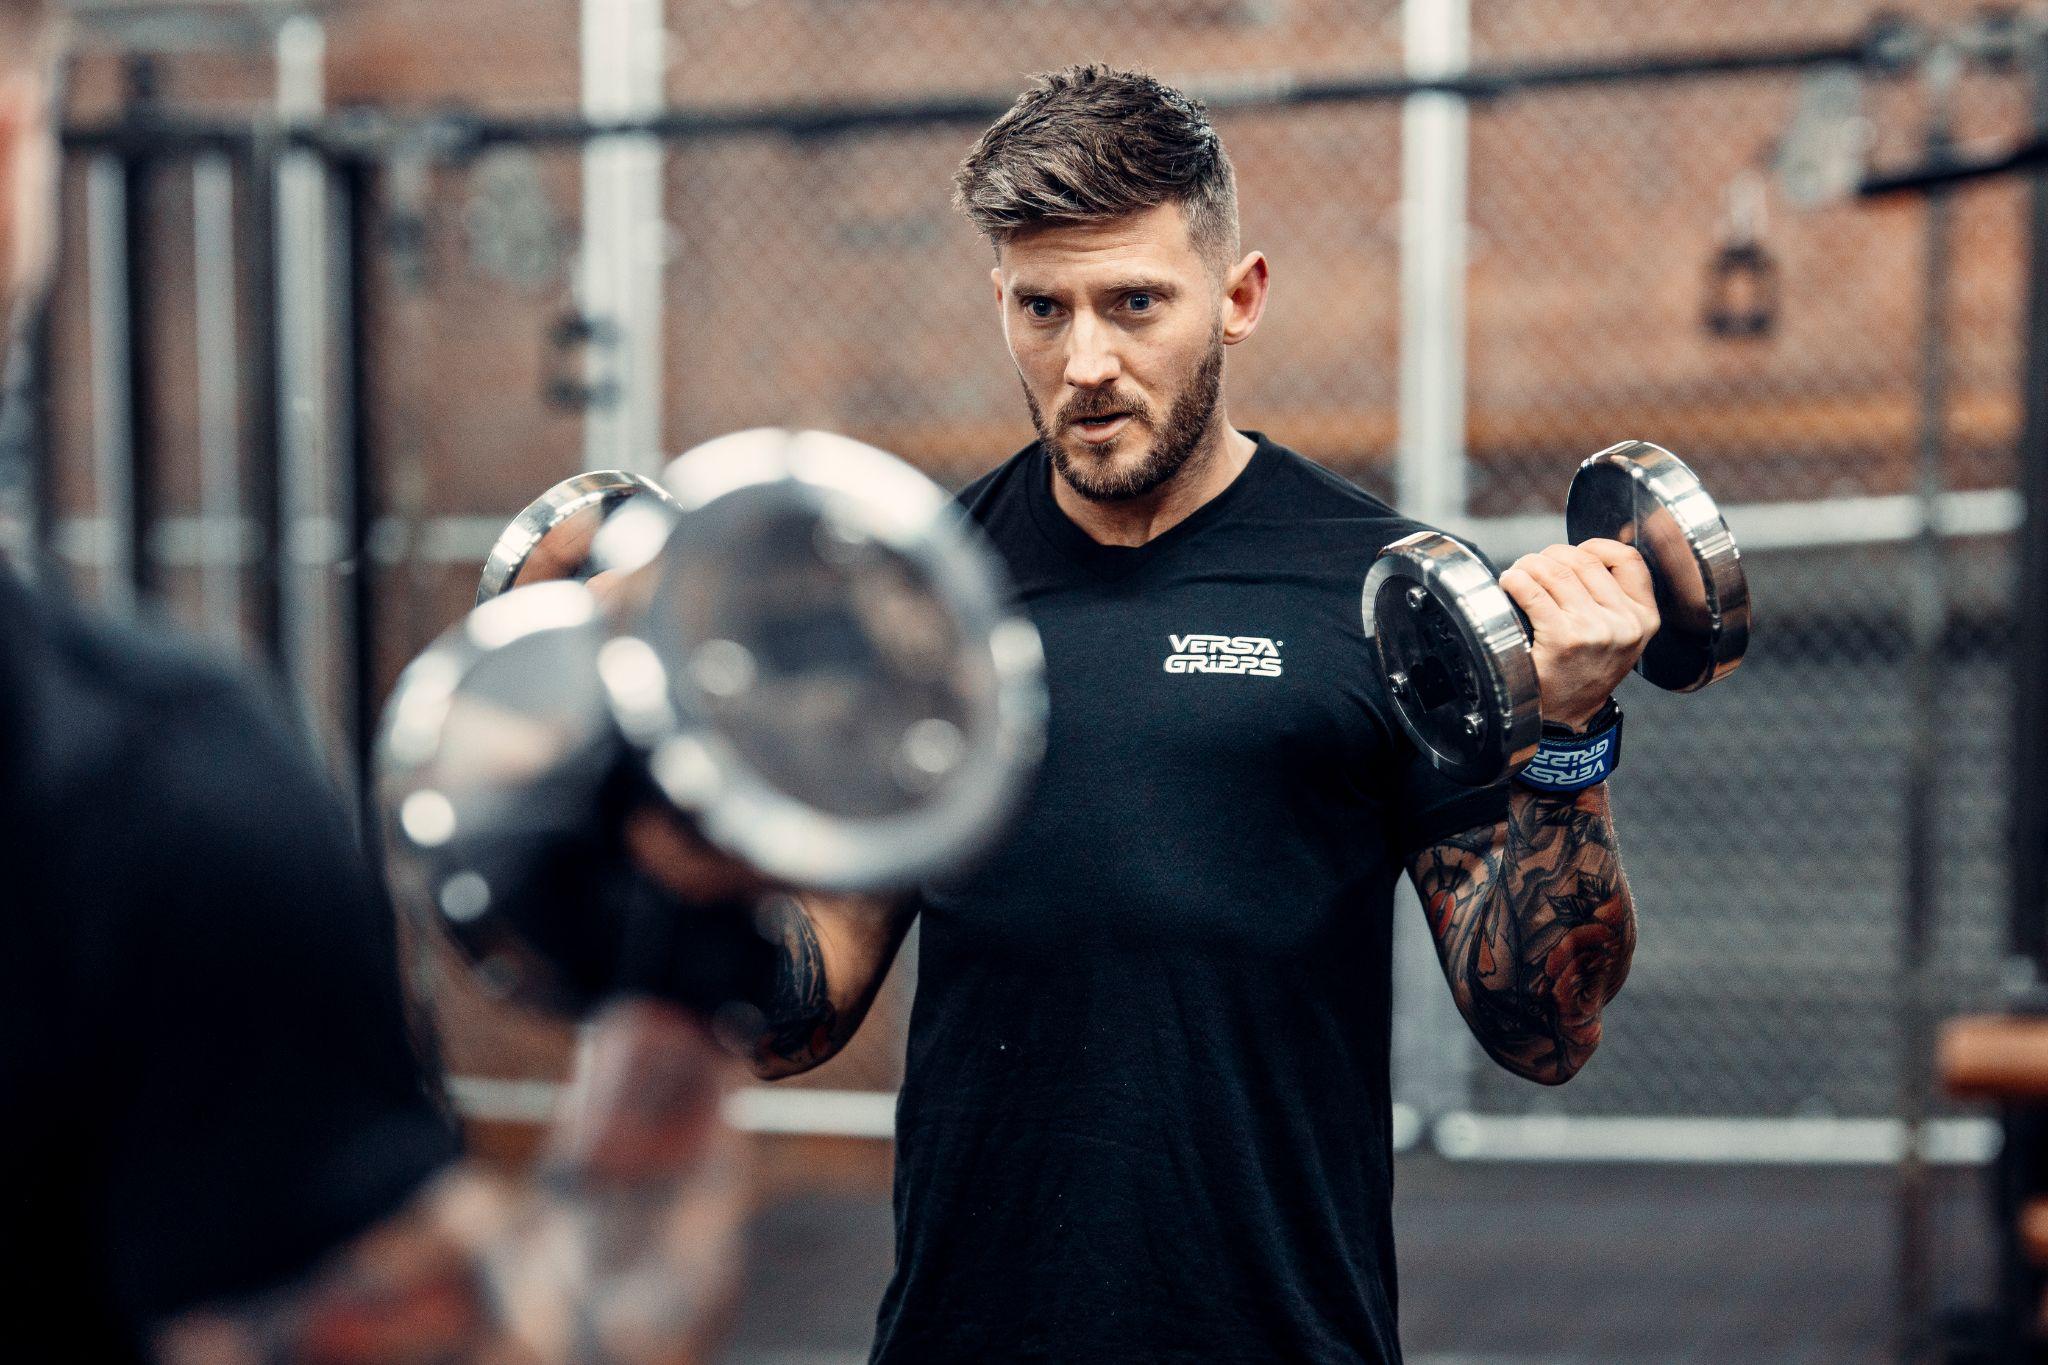 How Should I Protect My Hands When Lifting Weights? - STKR Concepts